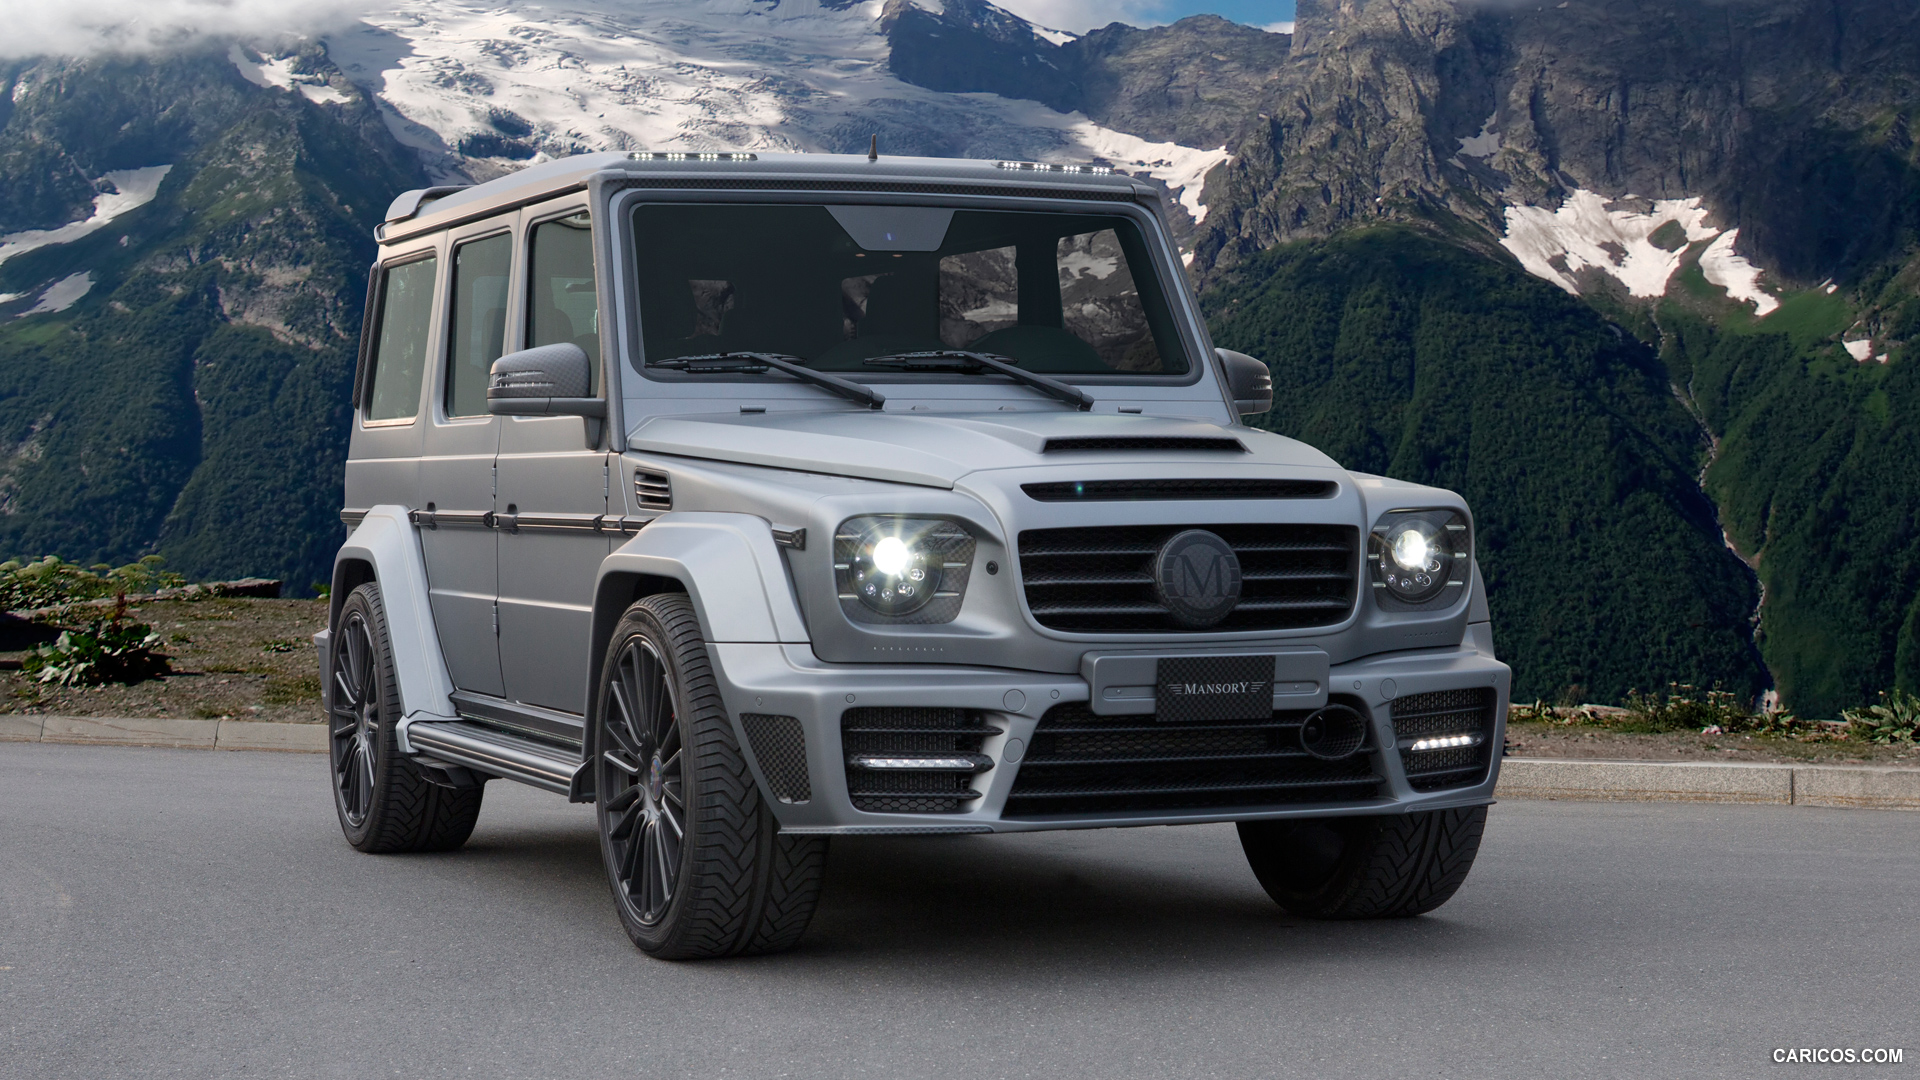 2014 Mansory Gronos based on Mercedes-Benz G-Class AMG  - Front, #1 of 6